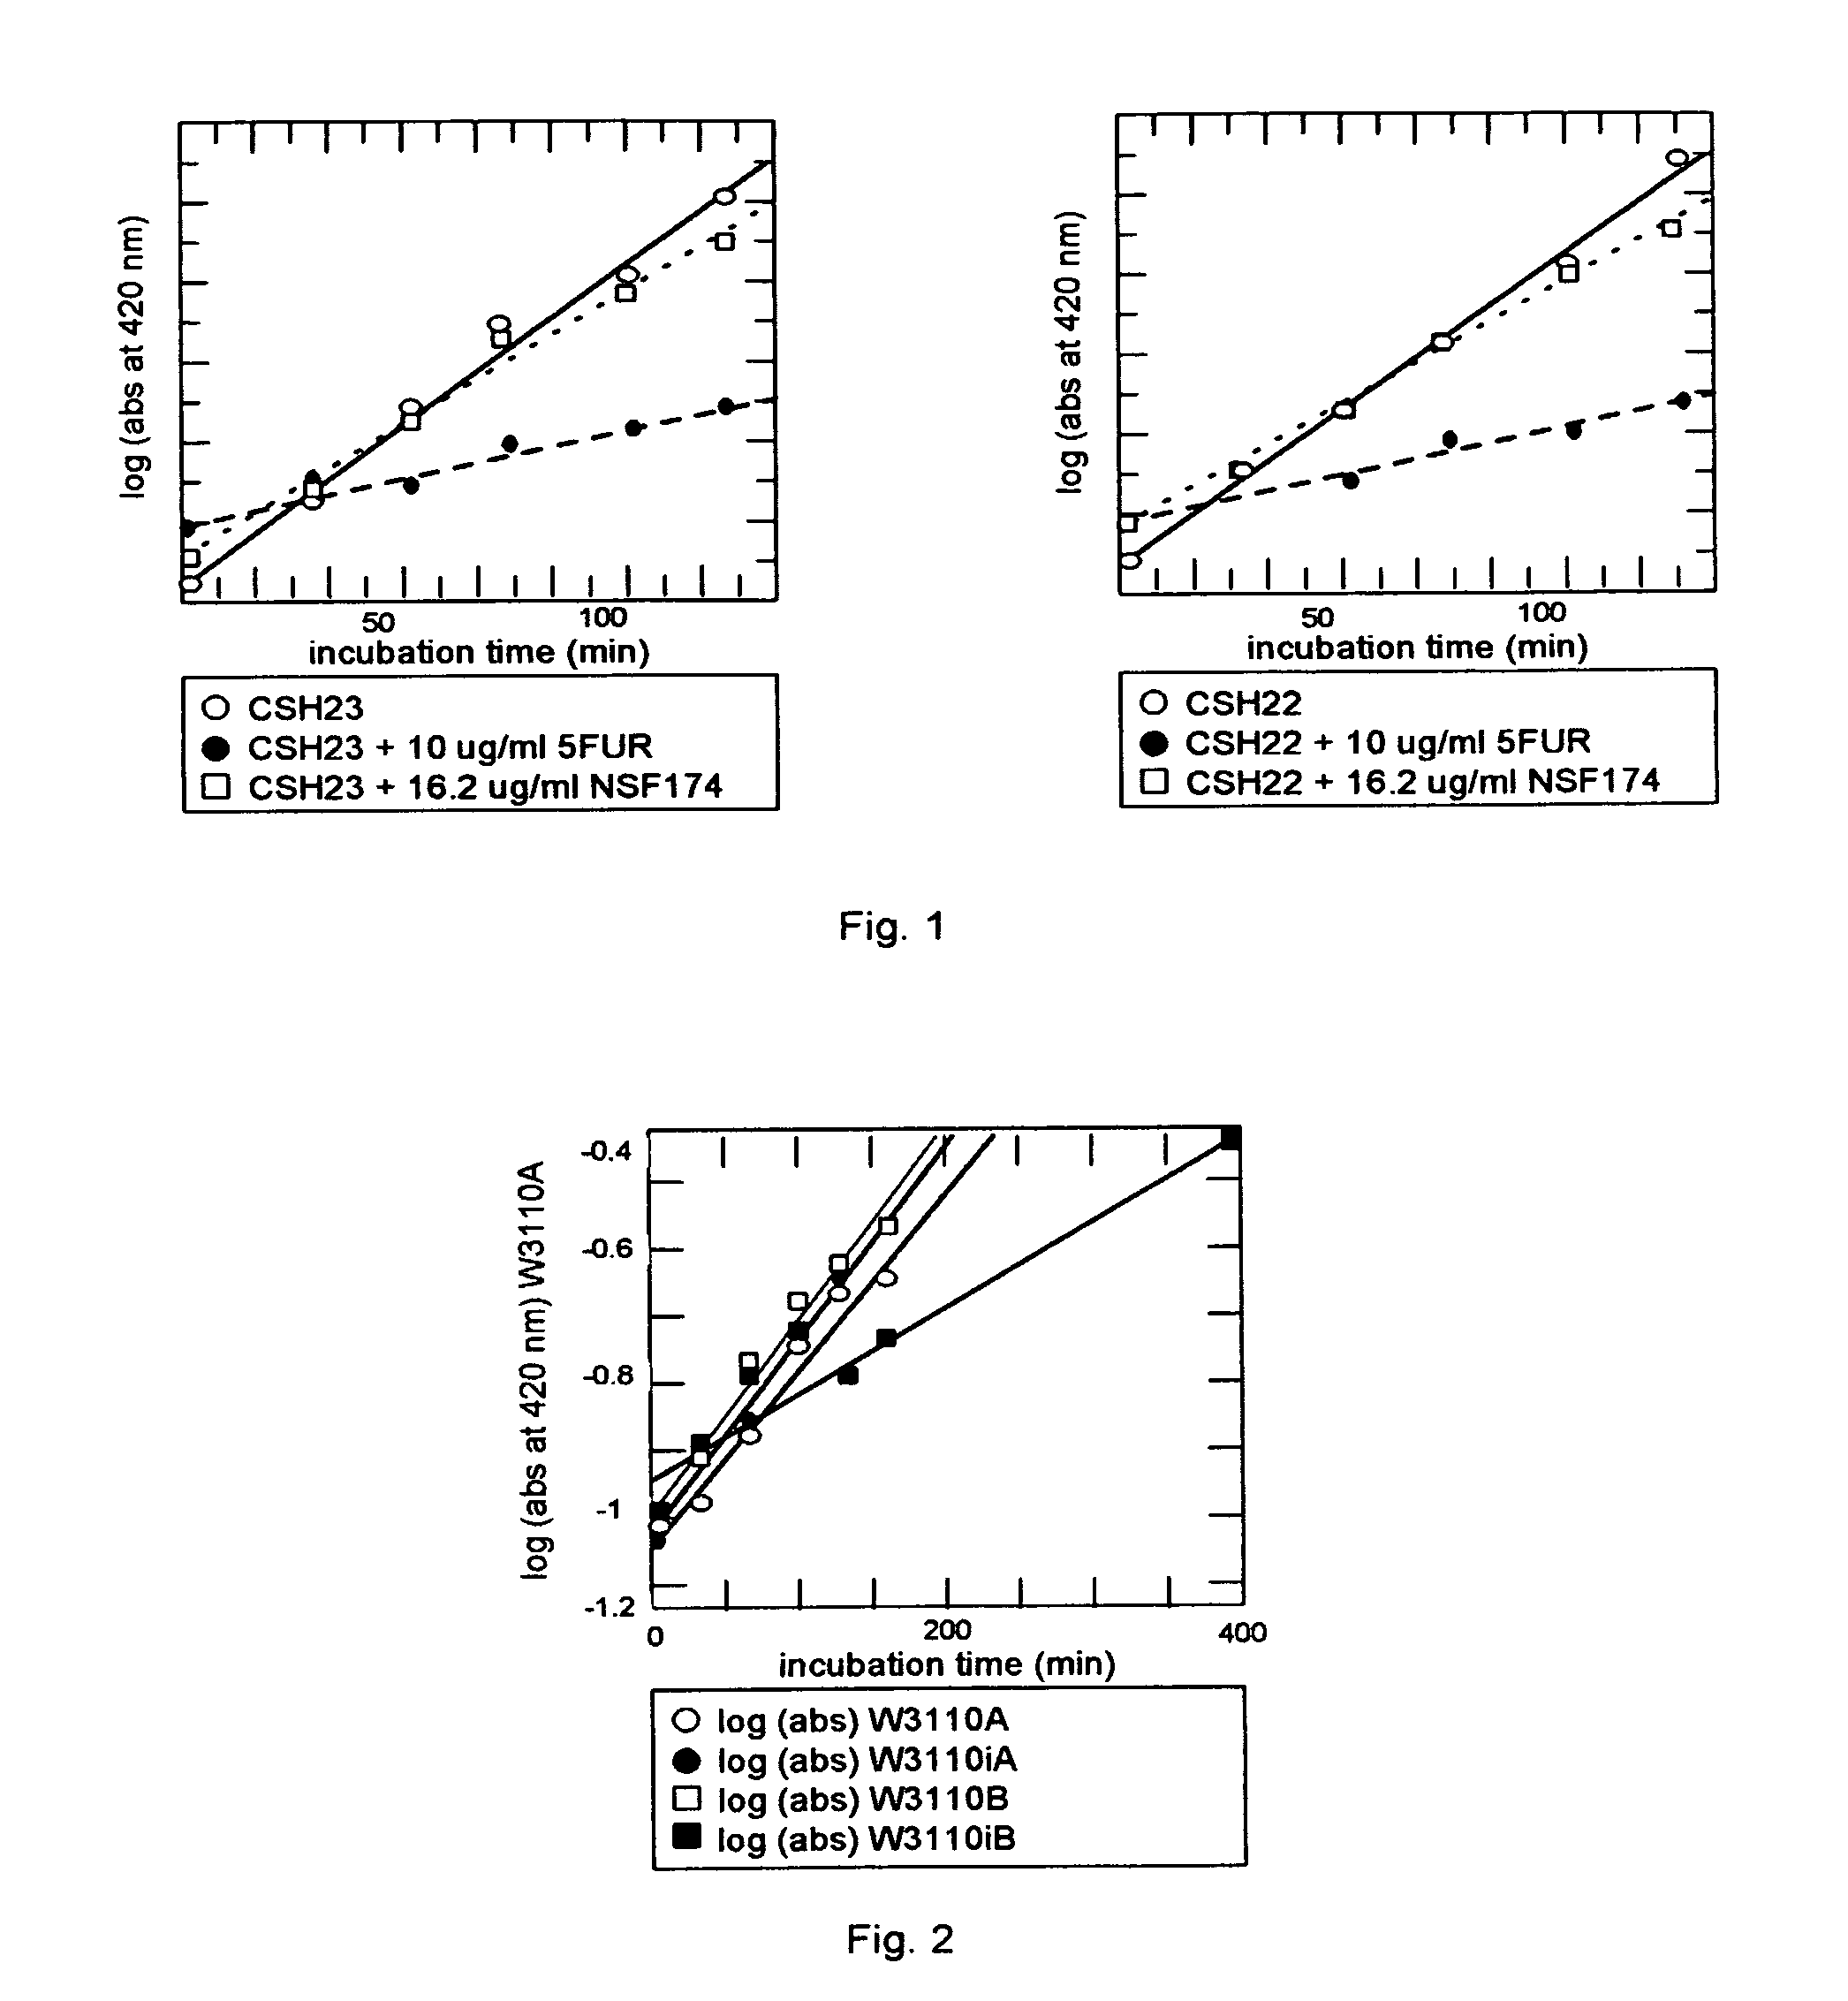 Method of altering glycosylation of proteins in response to nojirimycin glucuronide in a plant cell expressing glucuronidase